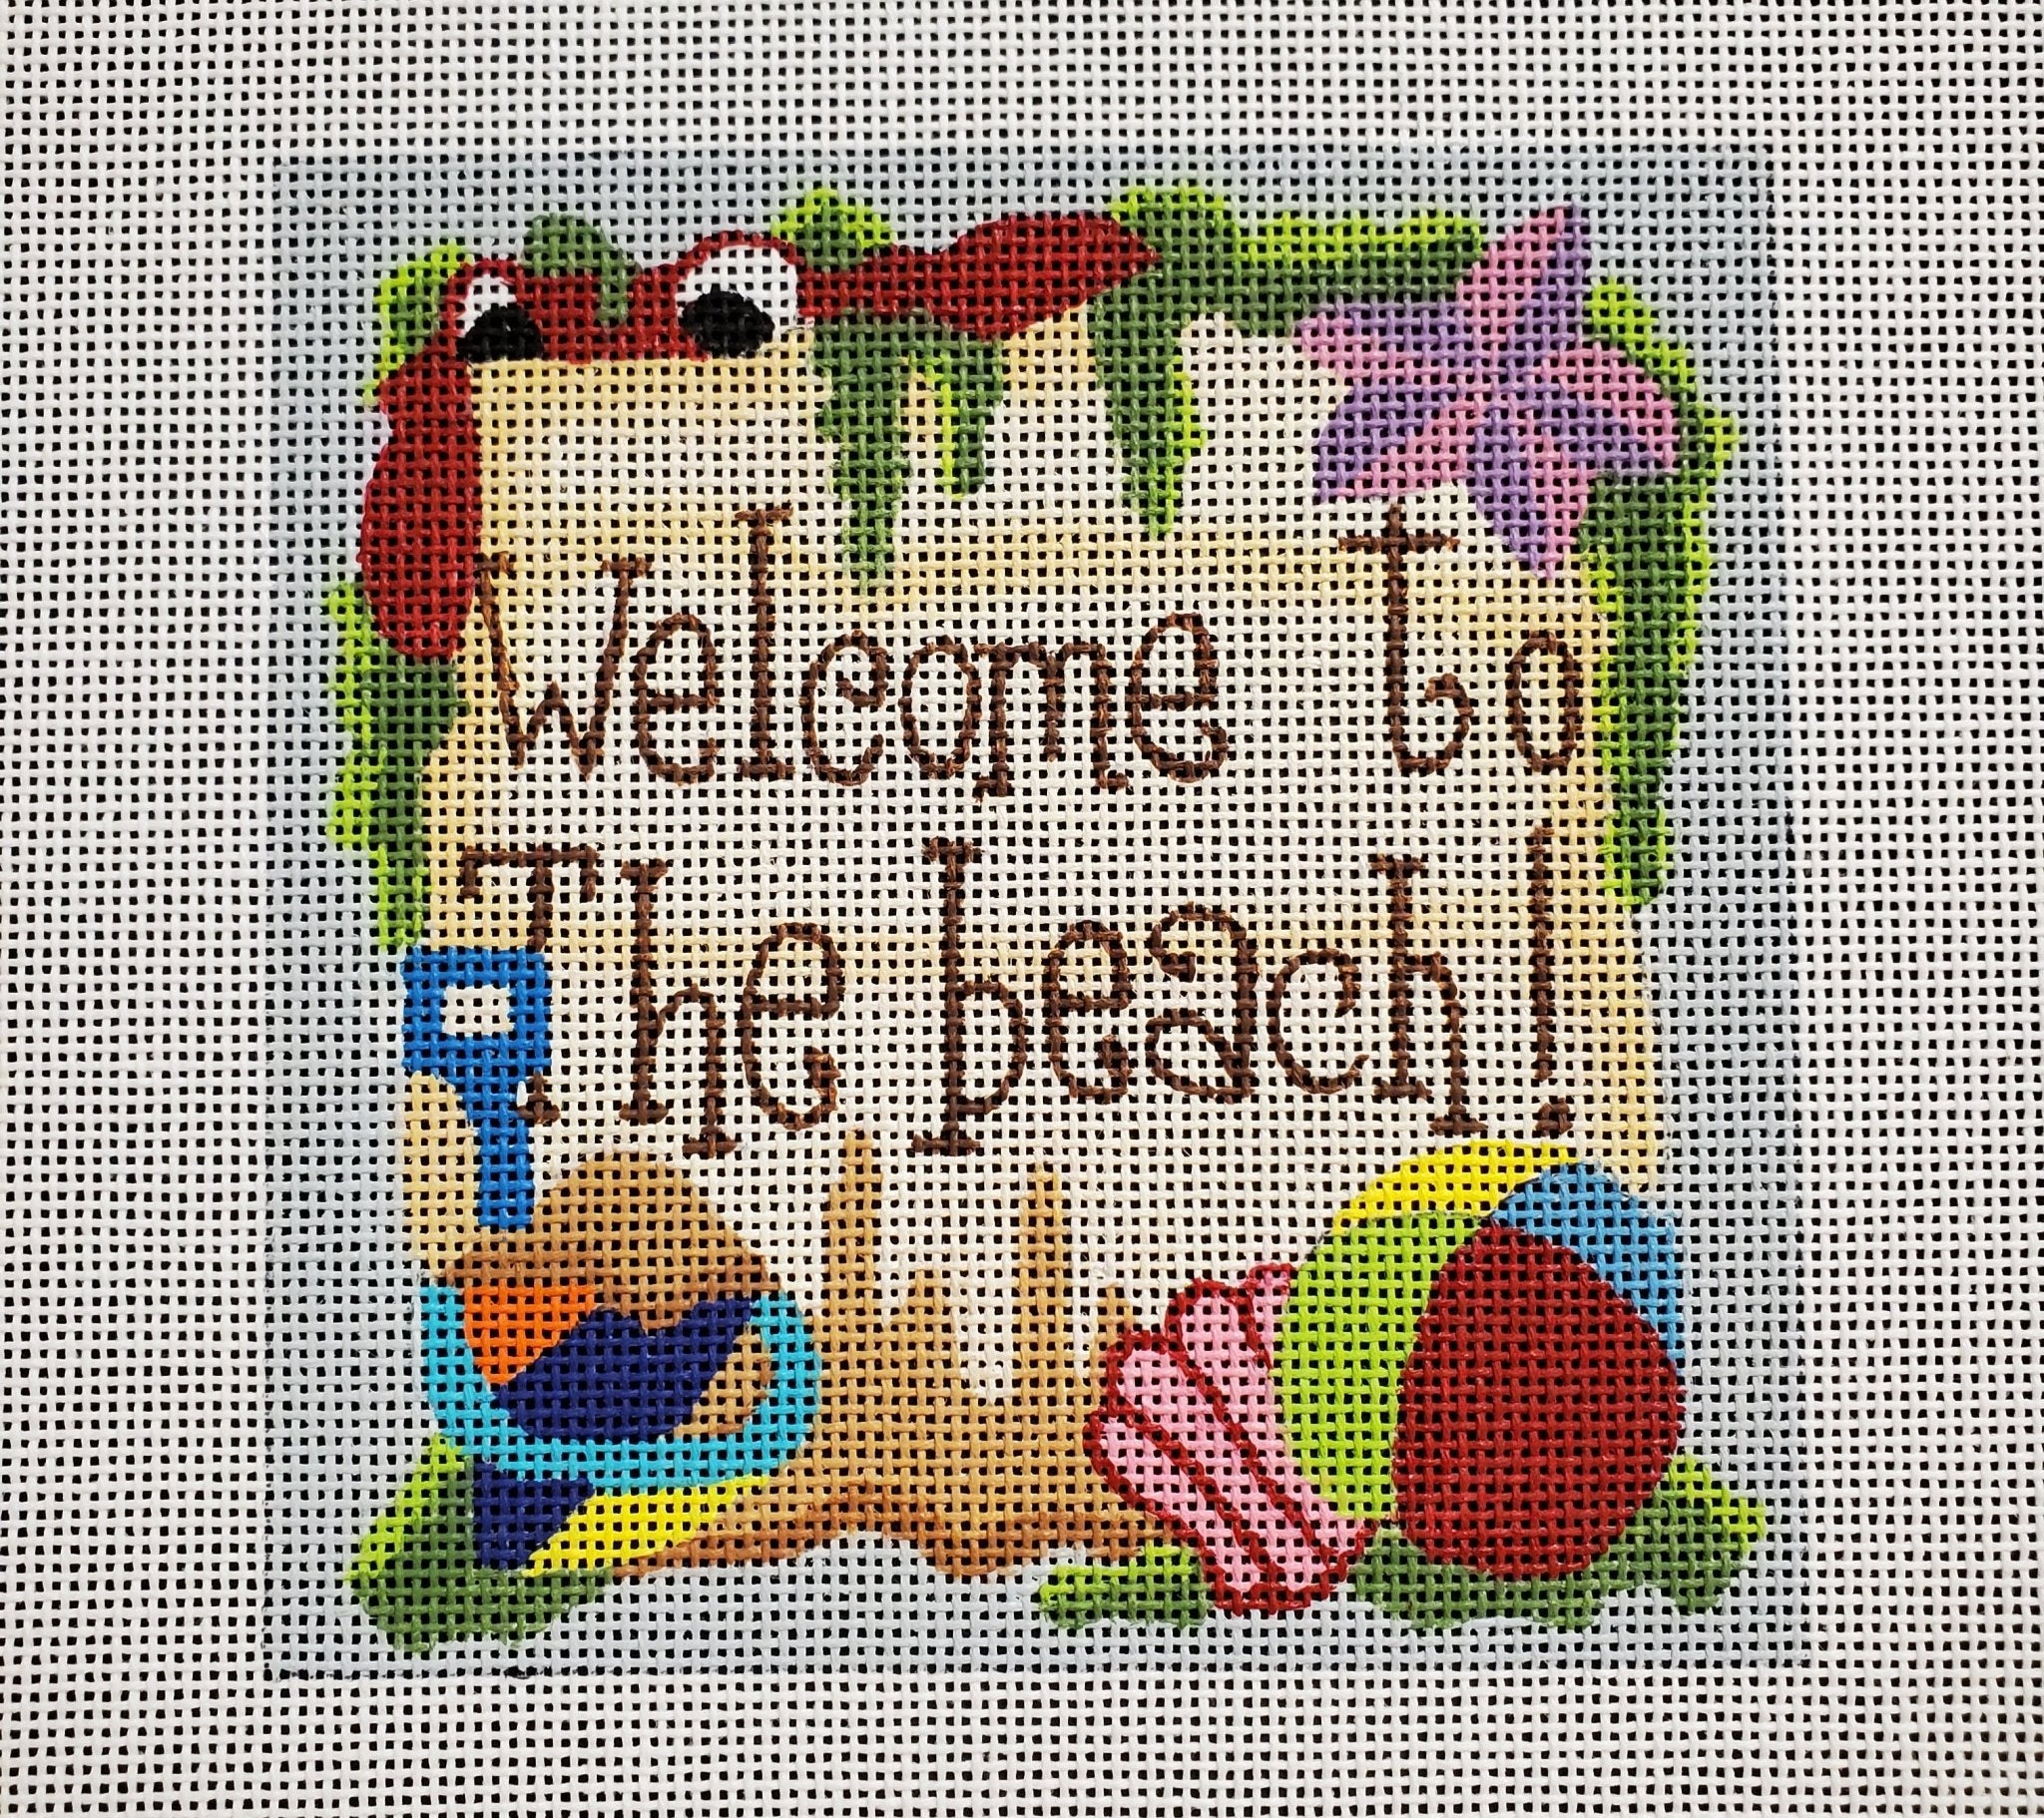 Welcome to the Beach - The Flying Needles